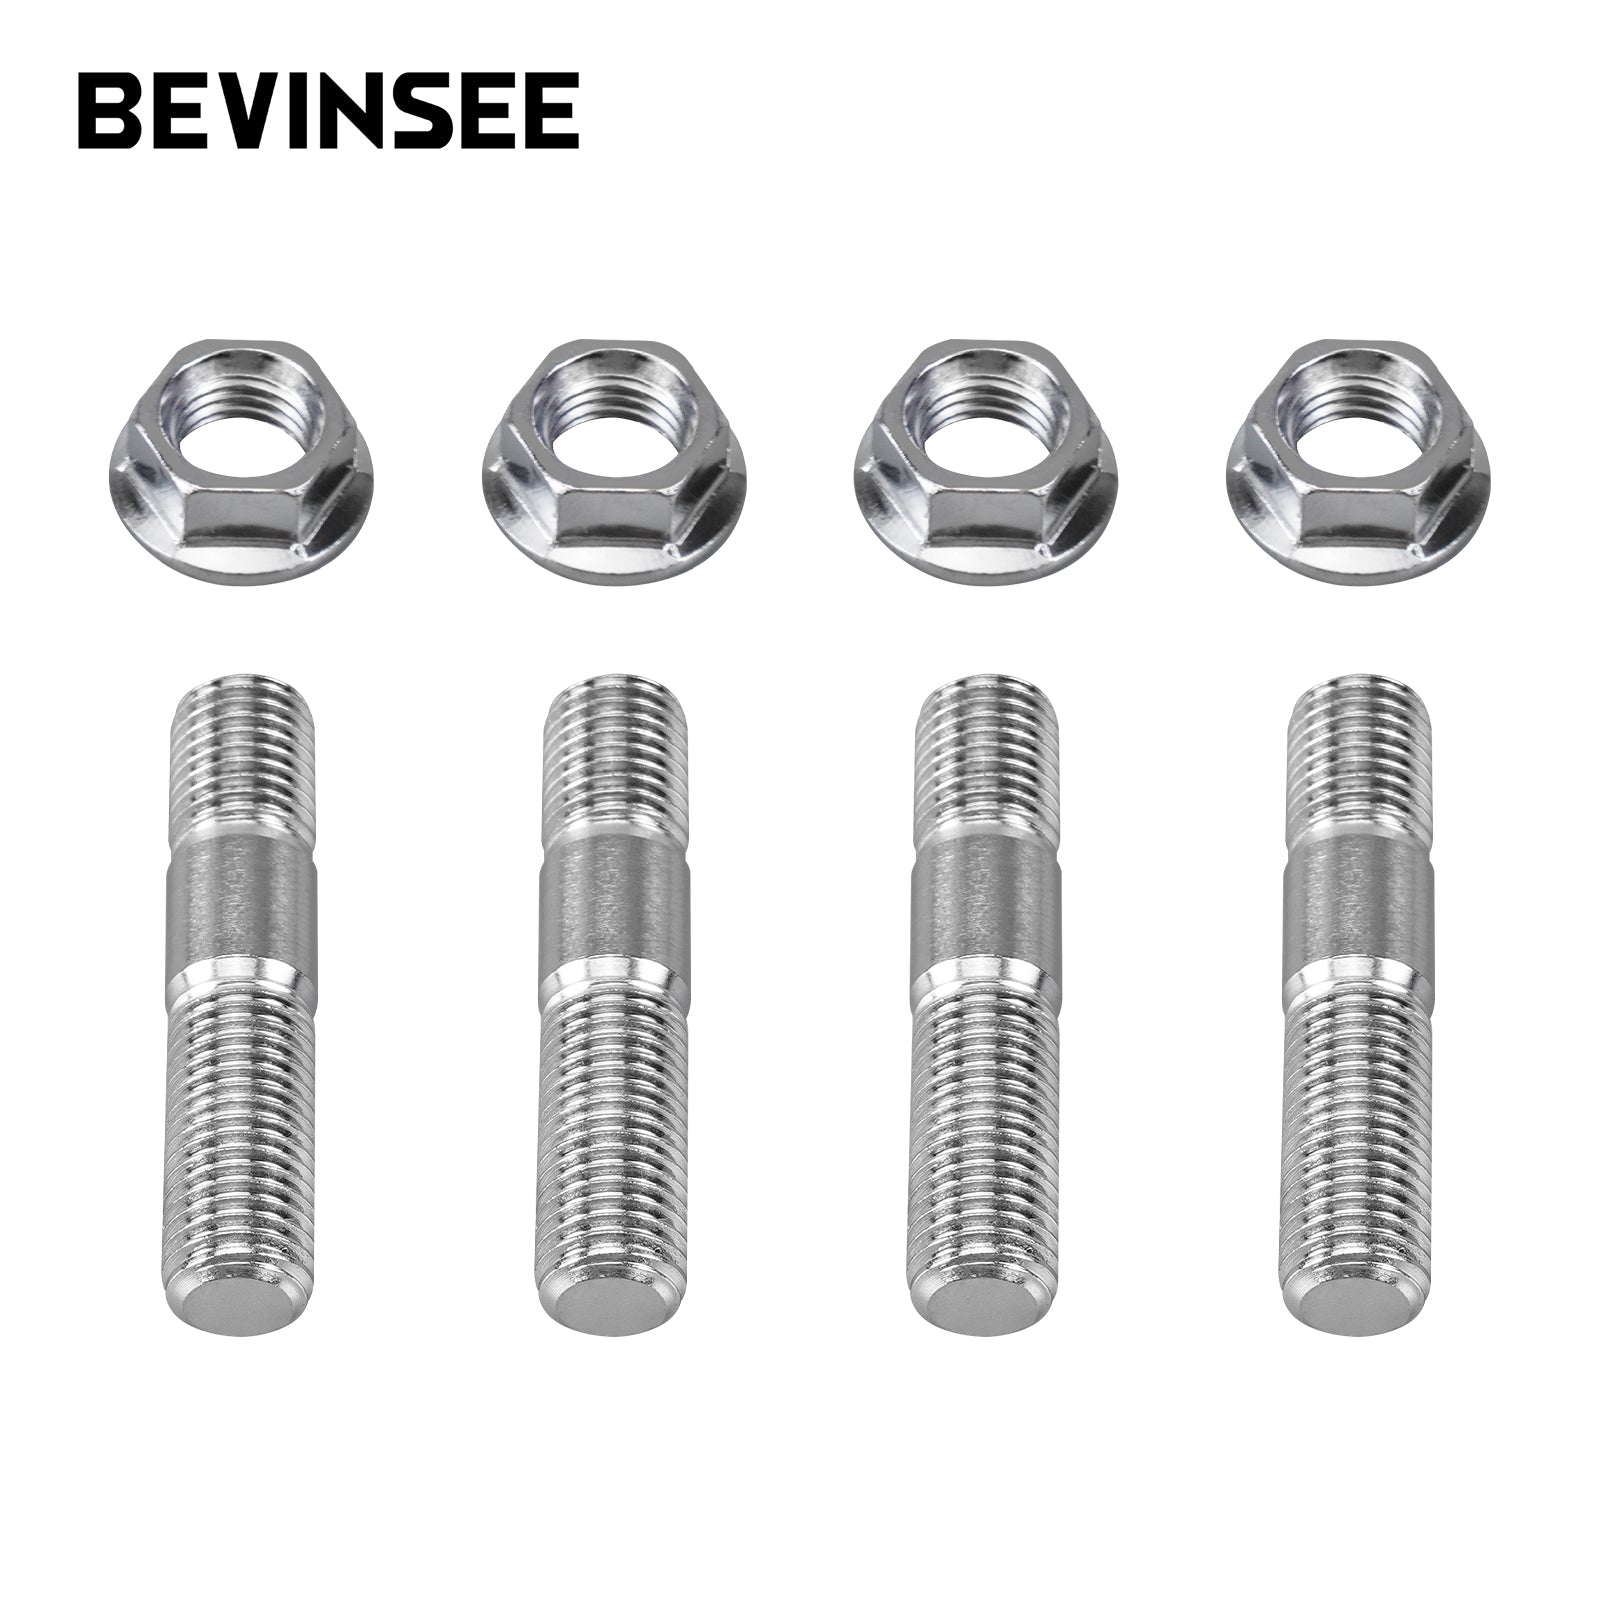 10mm M10x1.25 Stainless Steel Studs & Serrated Nuts Manifold Flange Kit